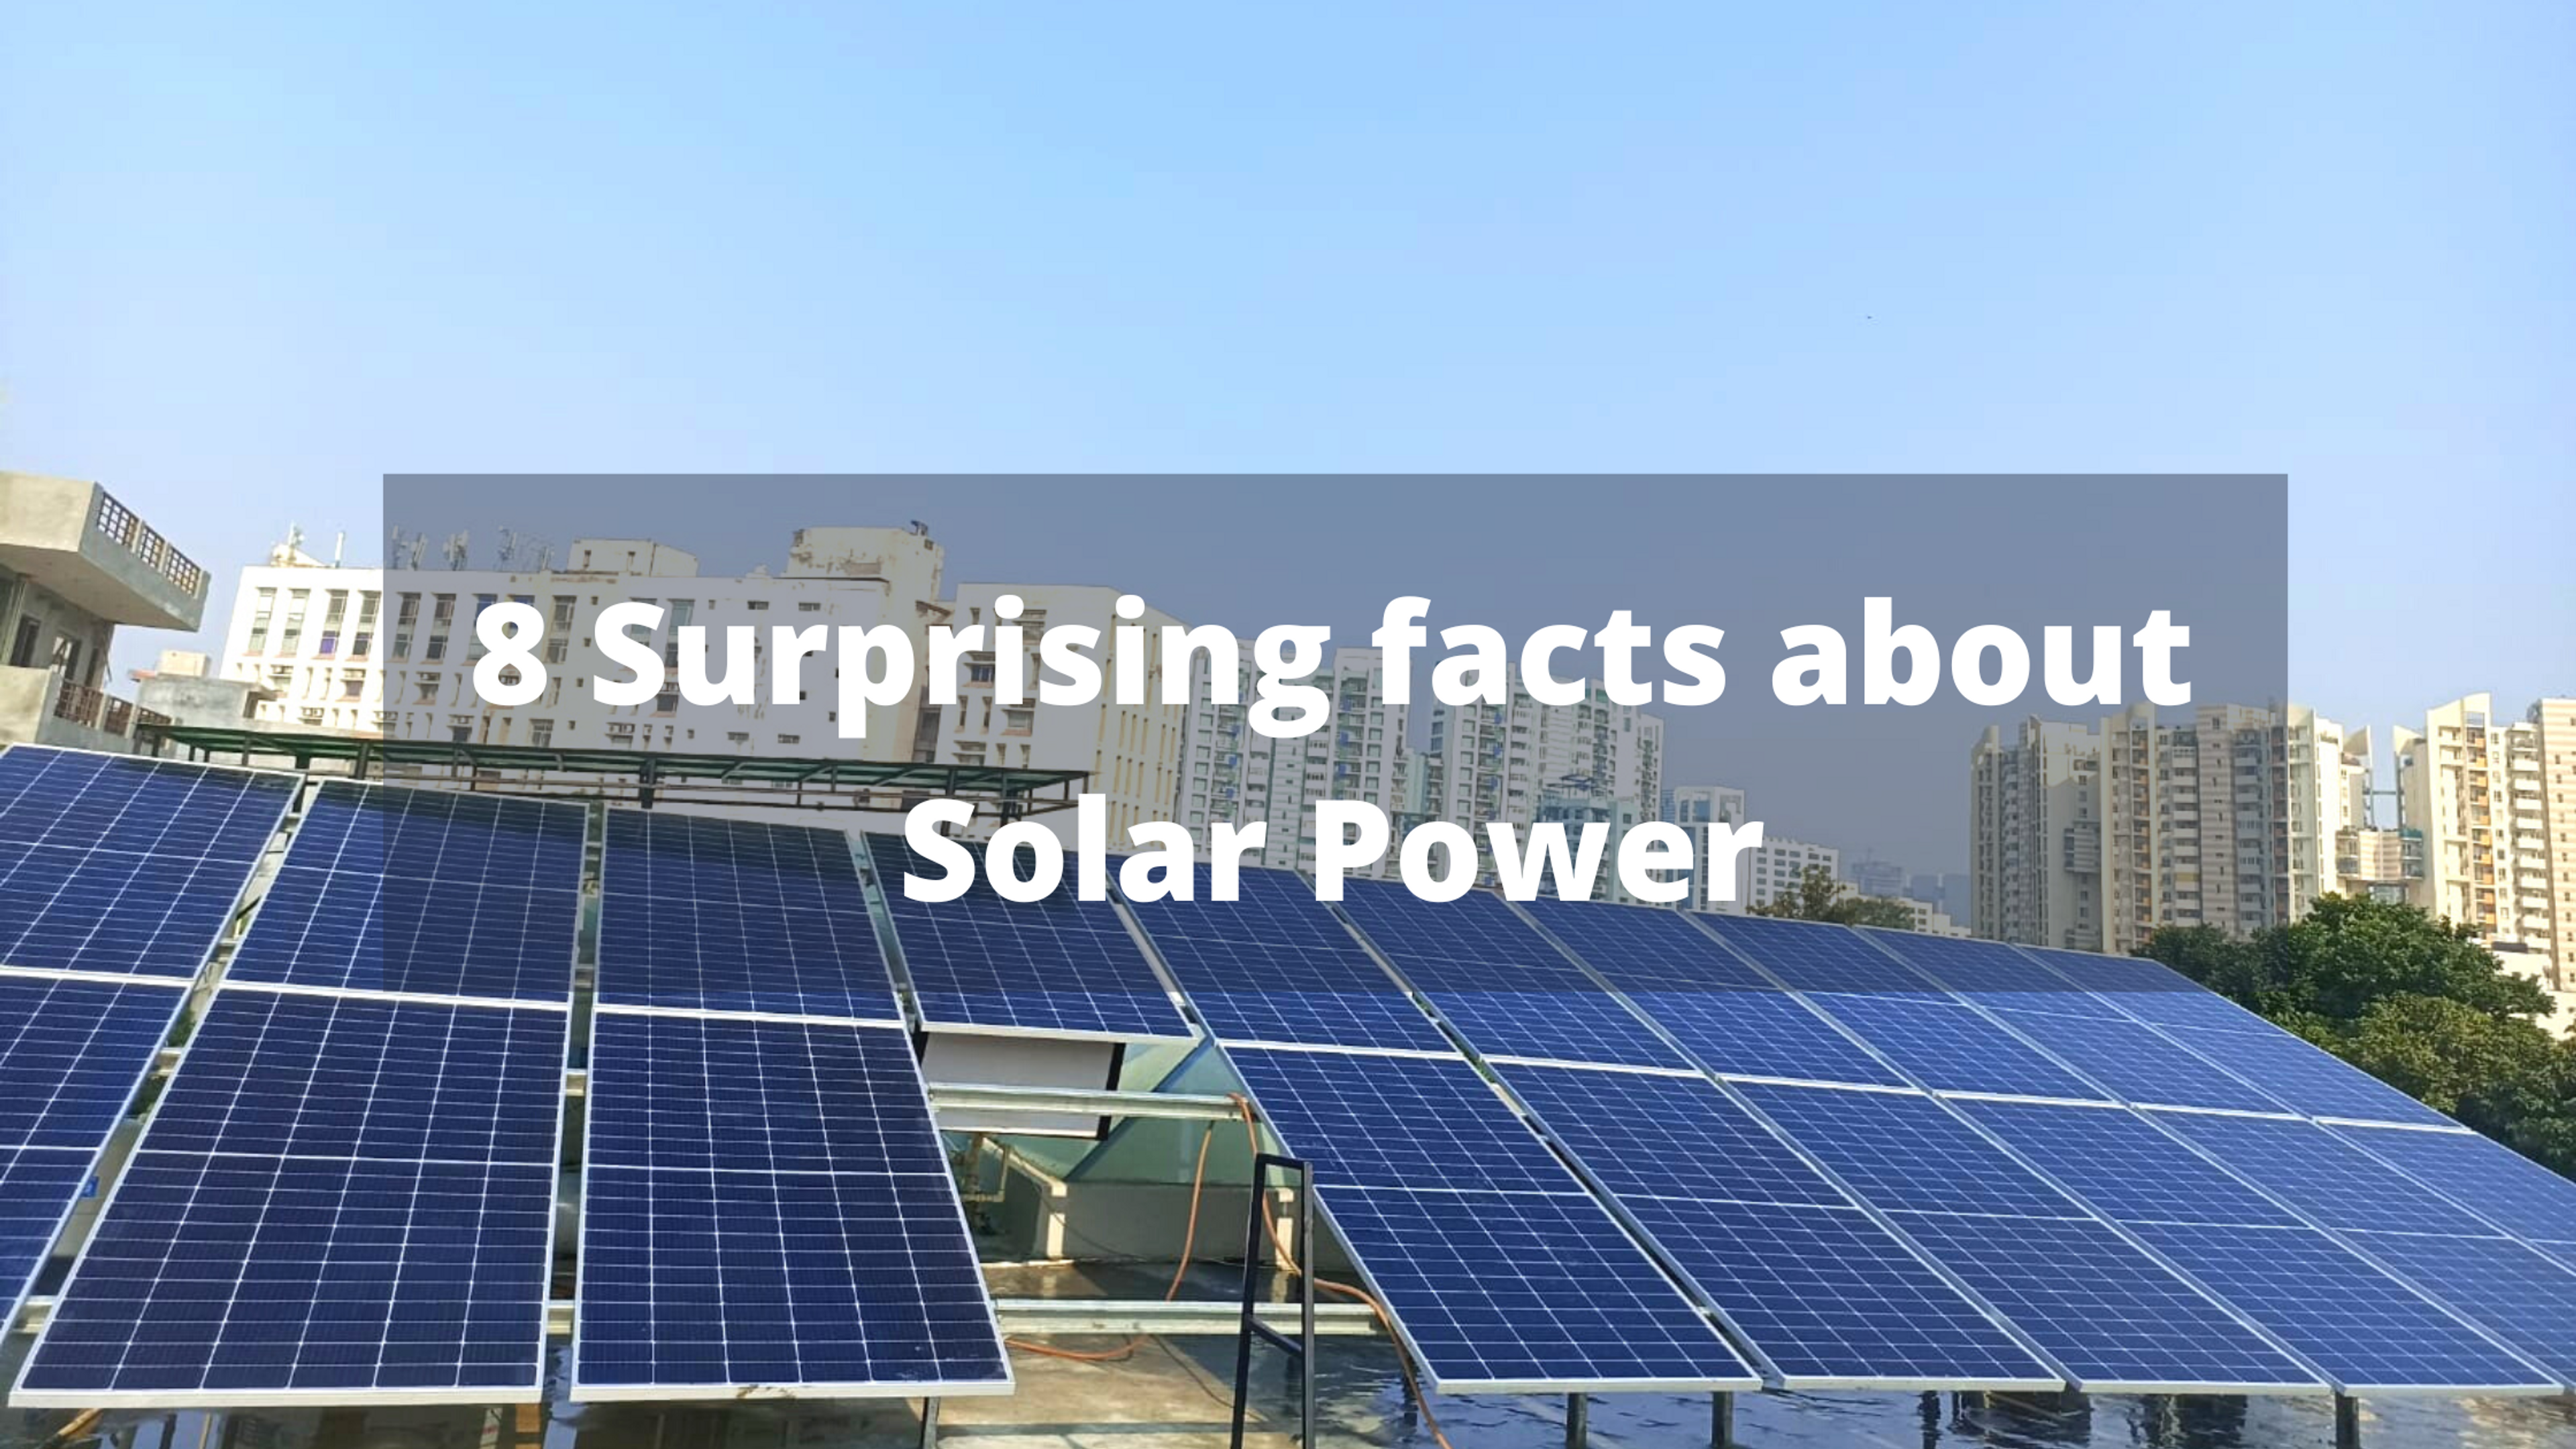 facts about solar power, facts about solar panels, facts about solar energy